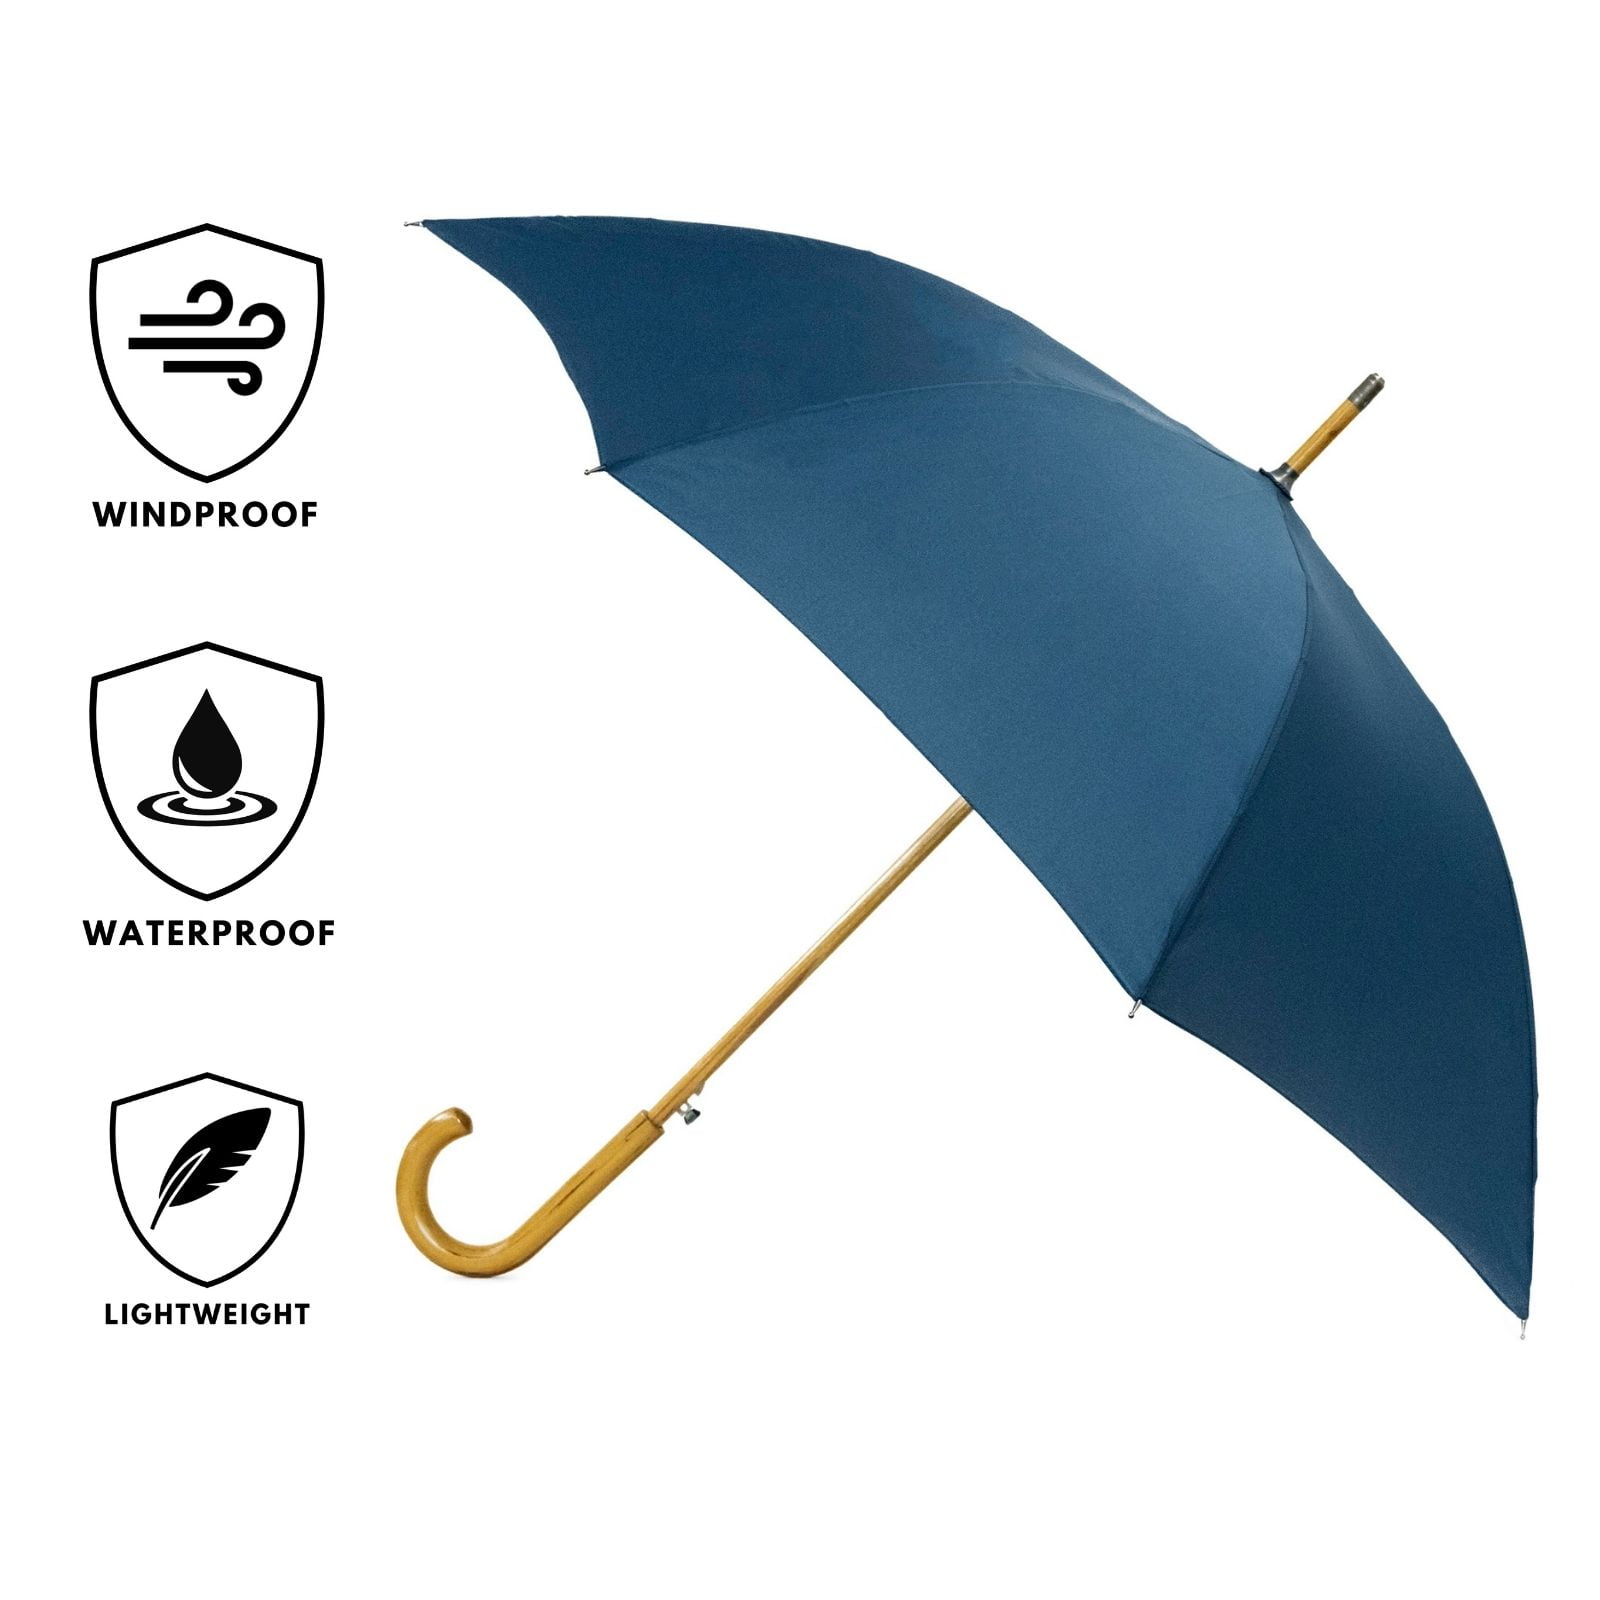 Warwick Dark Blue Windproof Walking Umbrella composite image showing it both open and closed